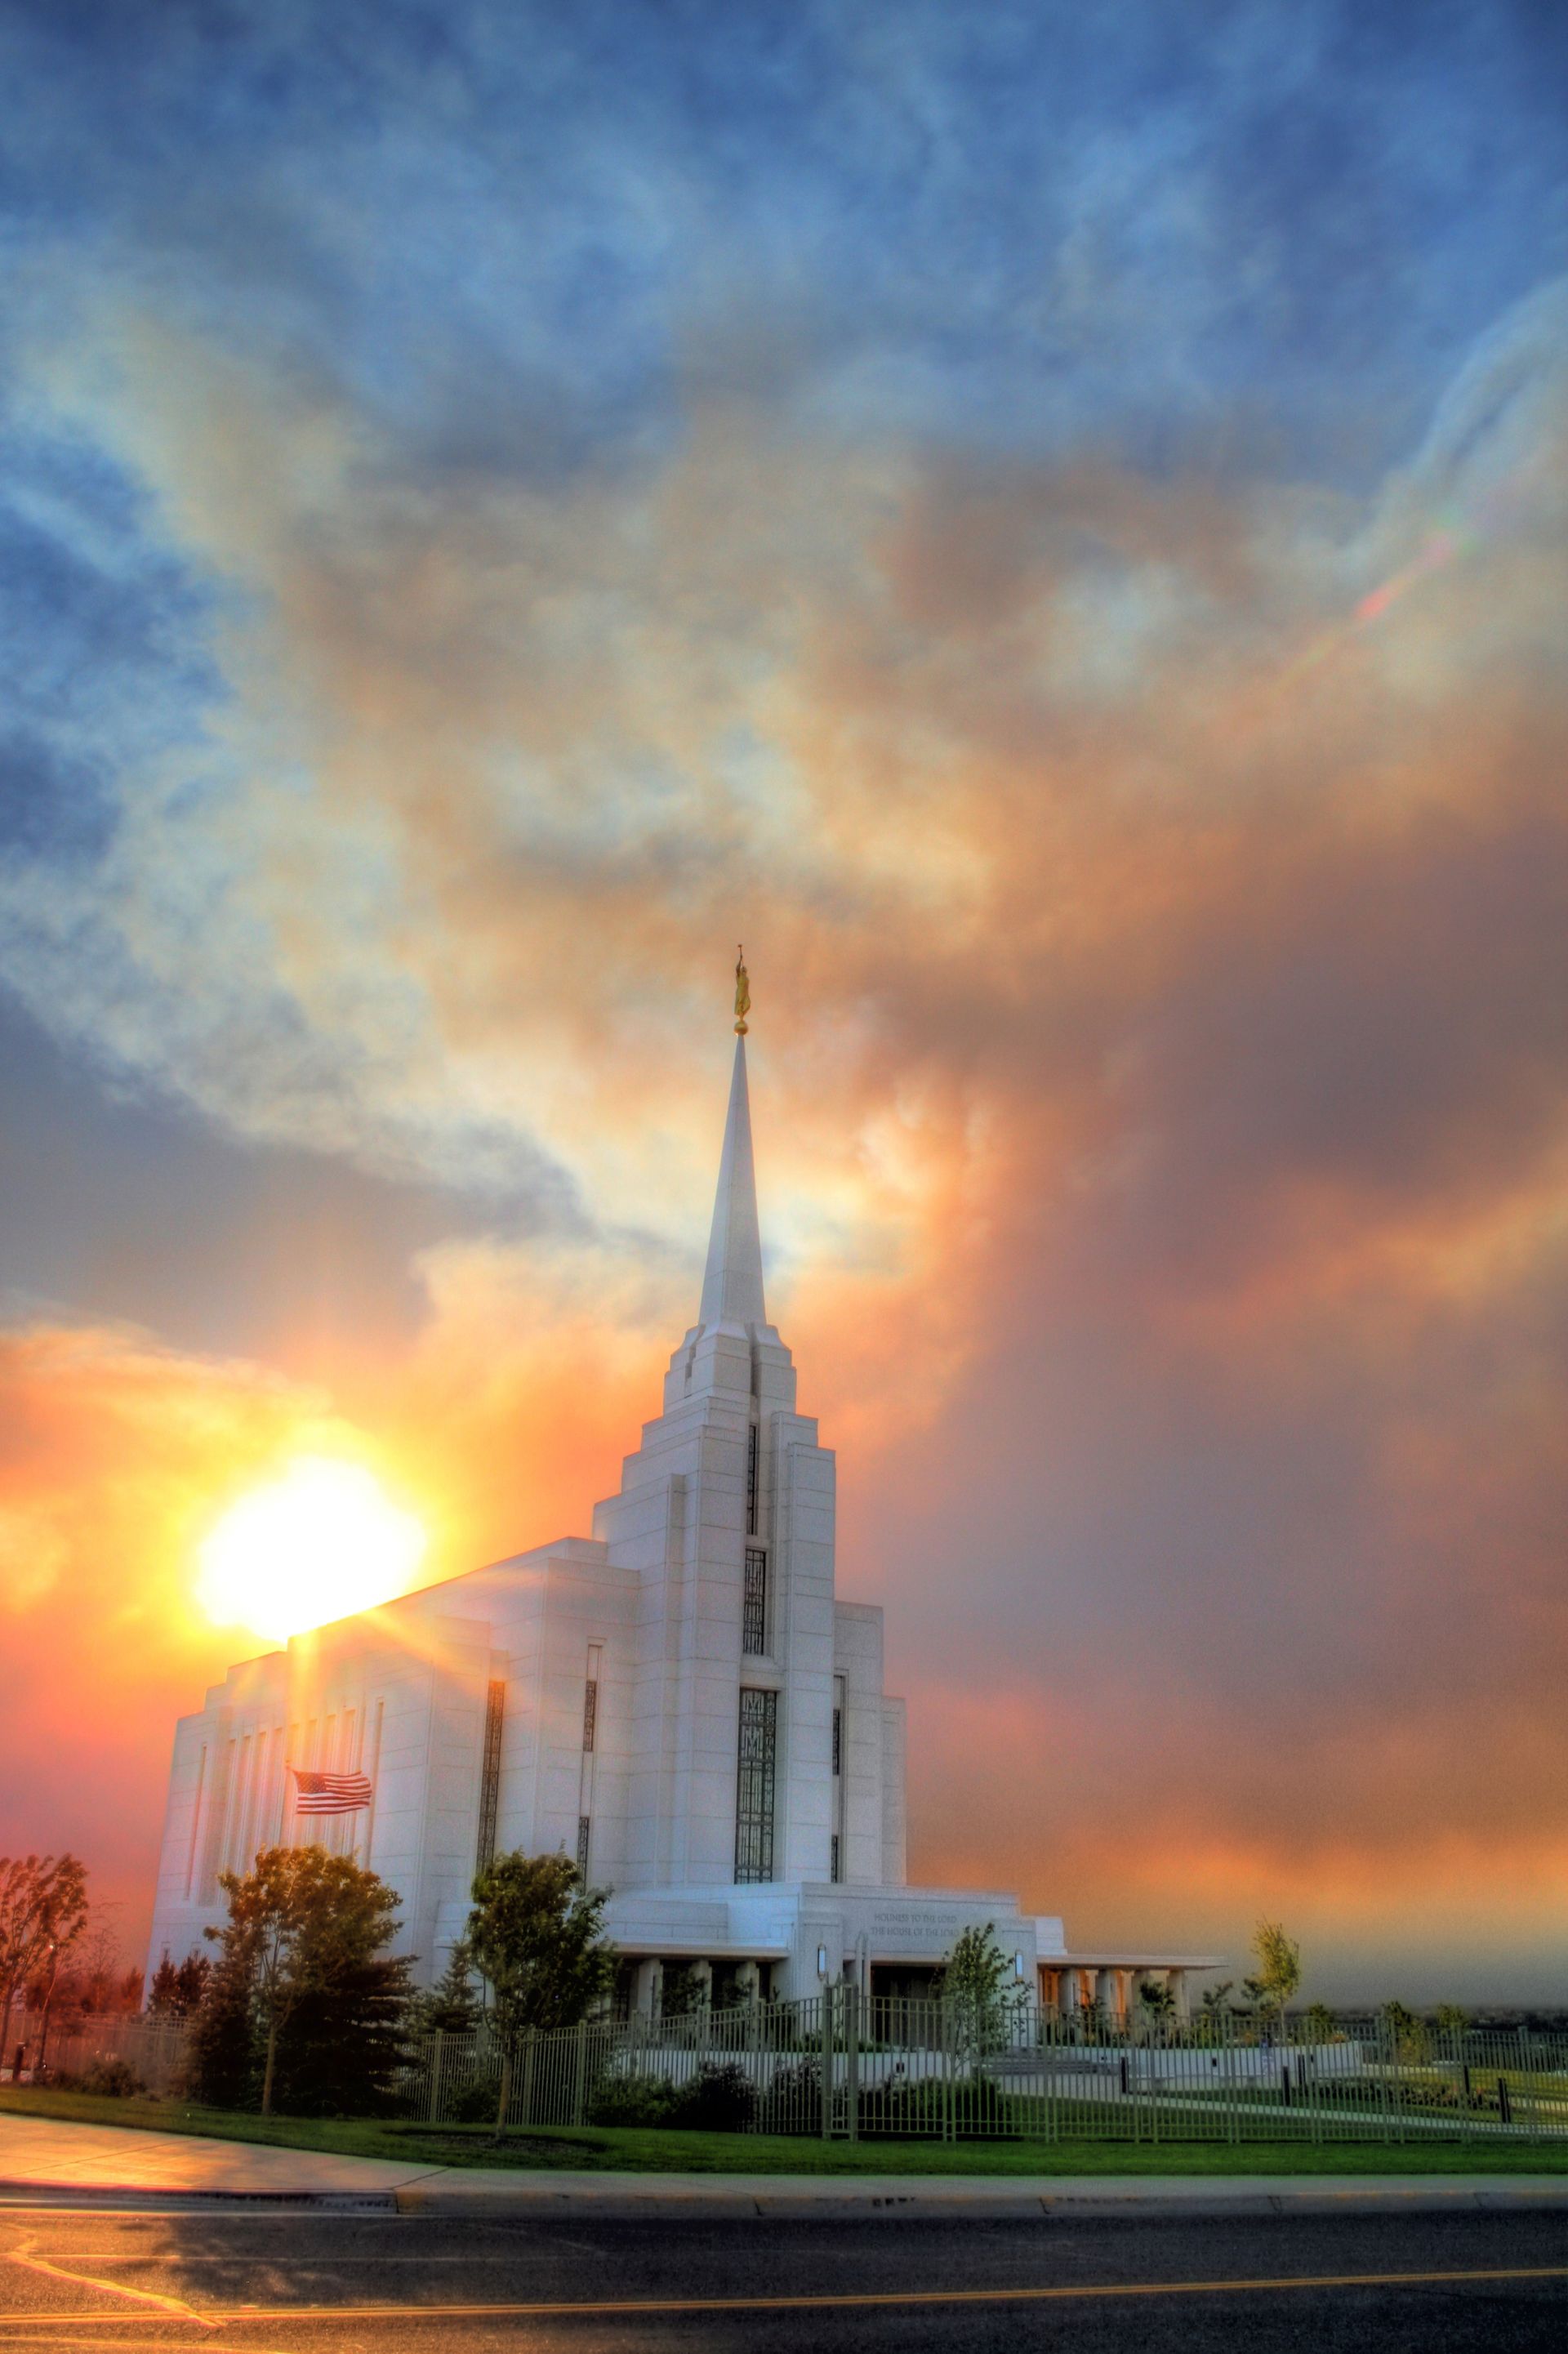 The Rexburg Idaho Temple at sunset, including clouds and scenery.